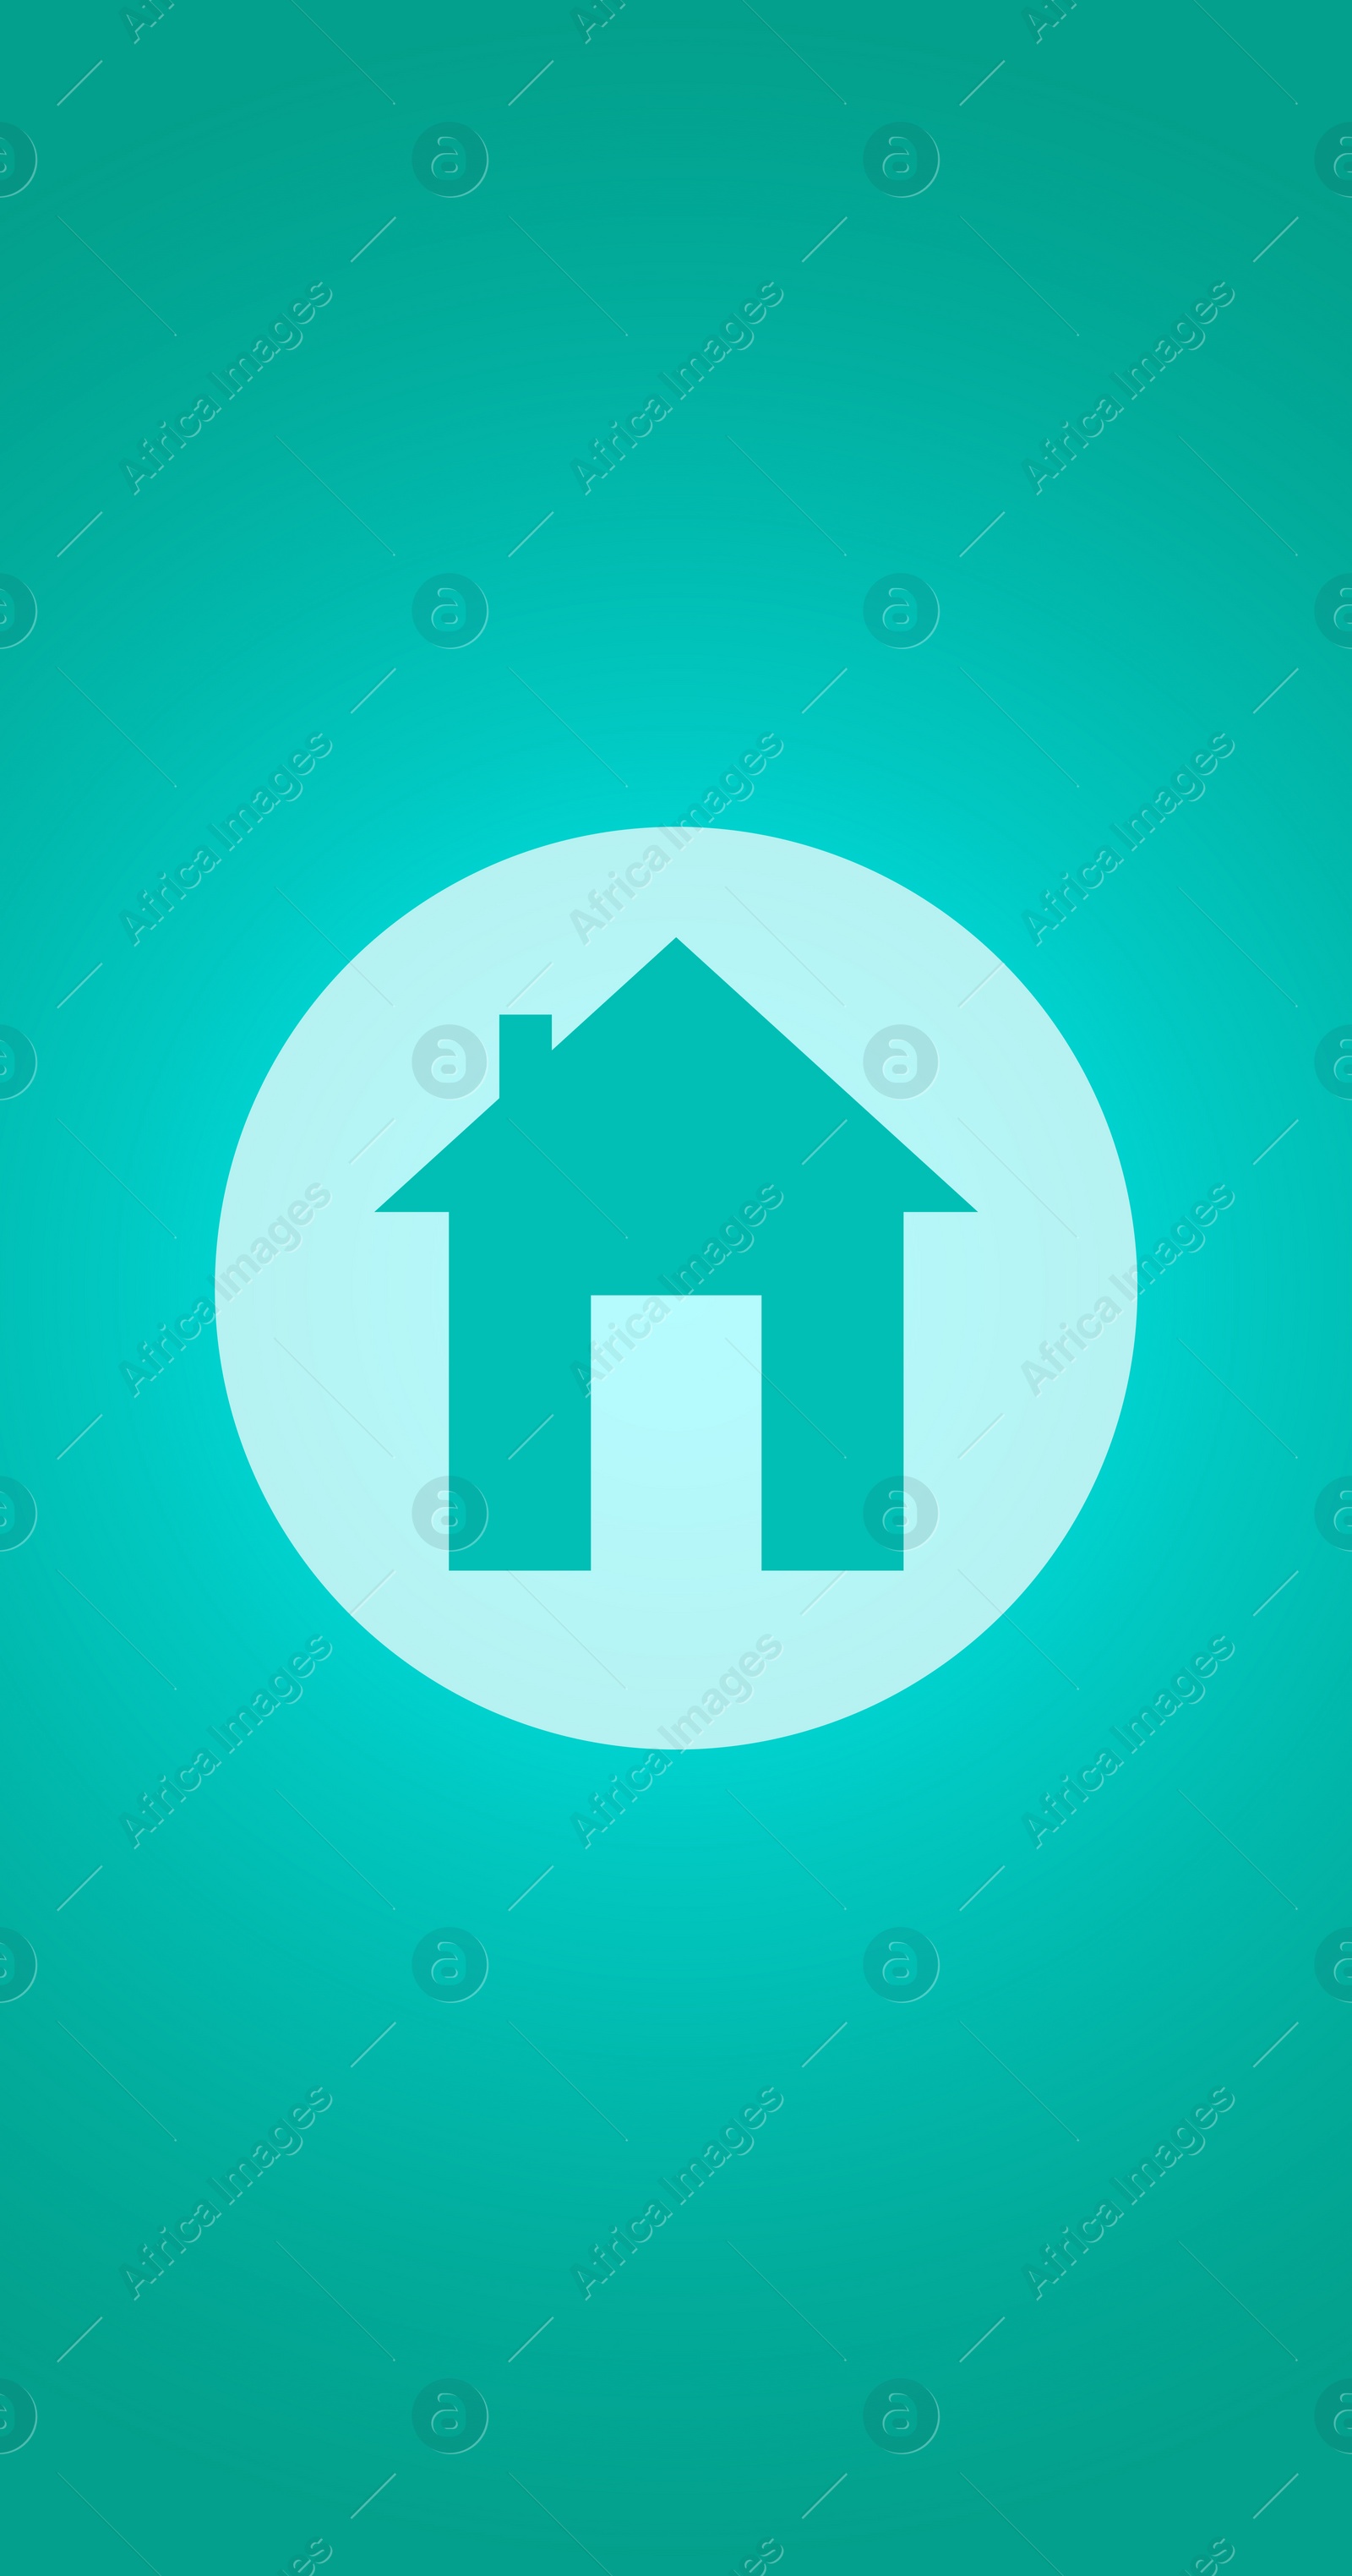 Illustration of  house in light circle on turquoise background